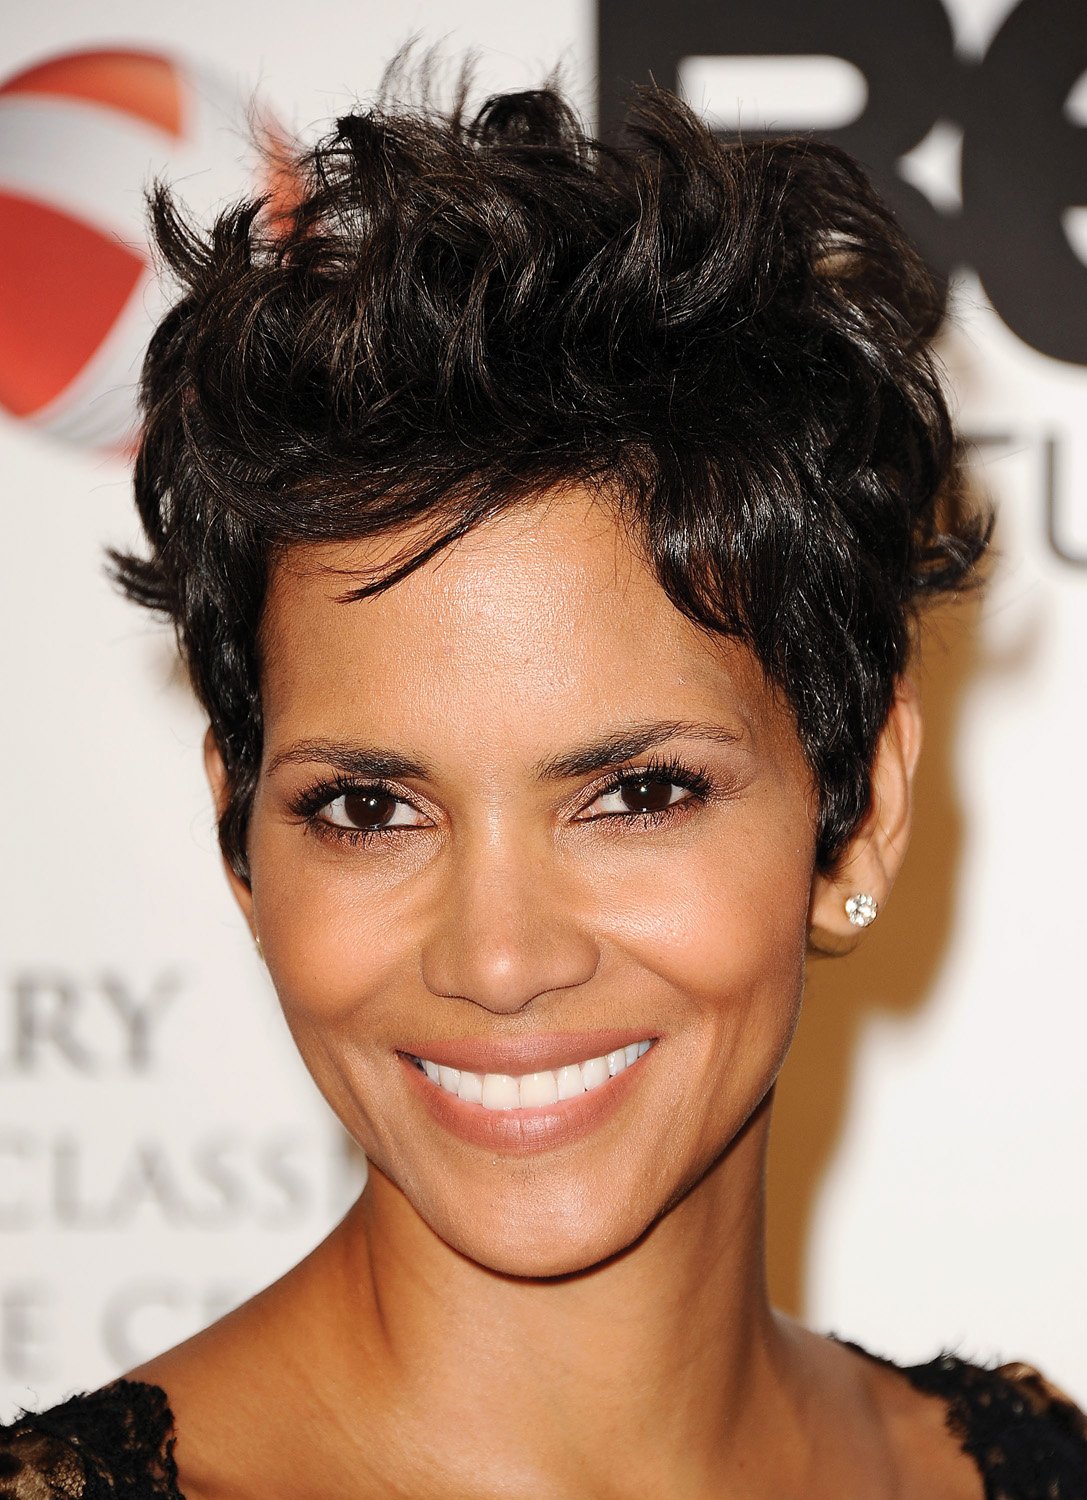 Halle Berry dishes on beauty, aging and the red carpet